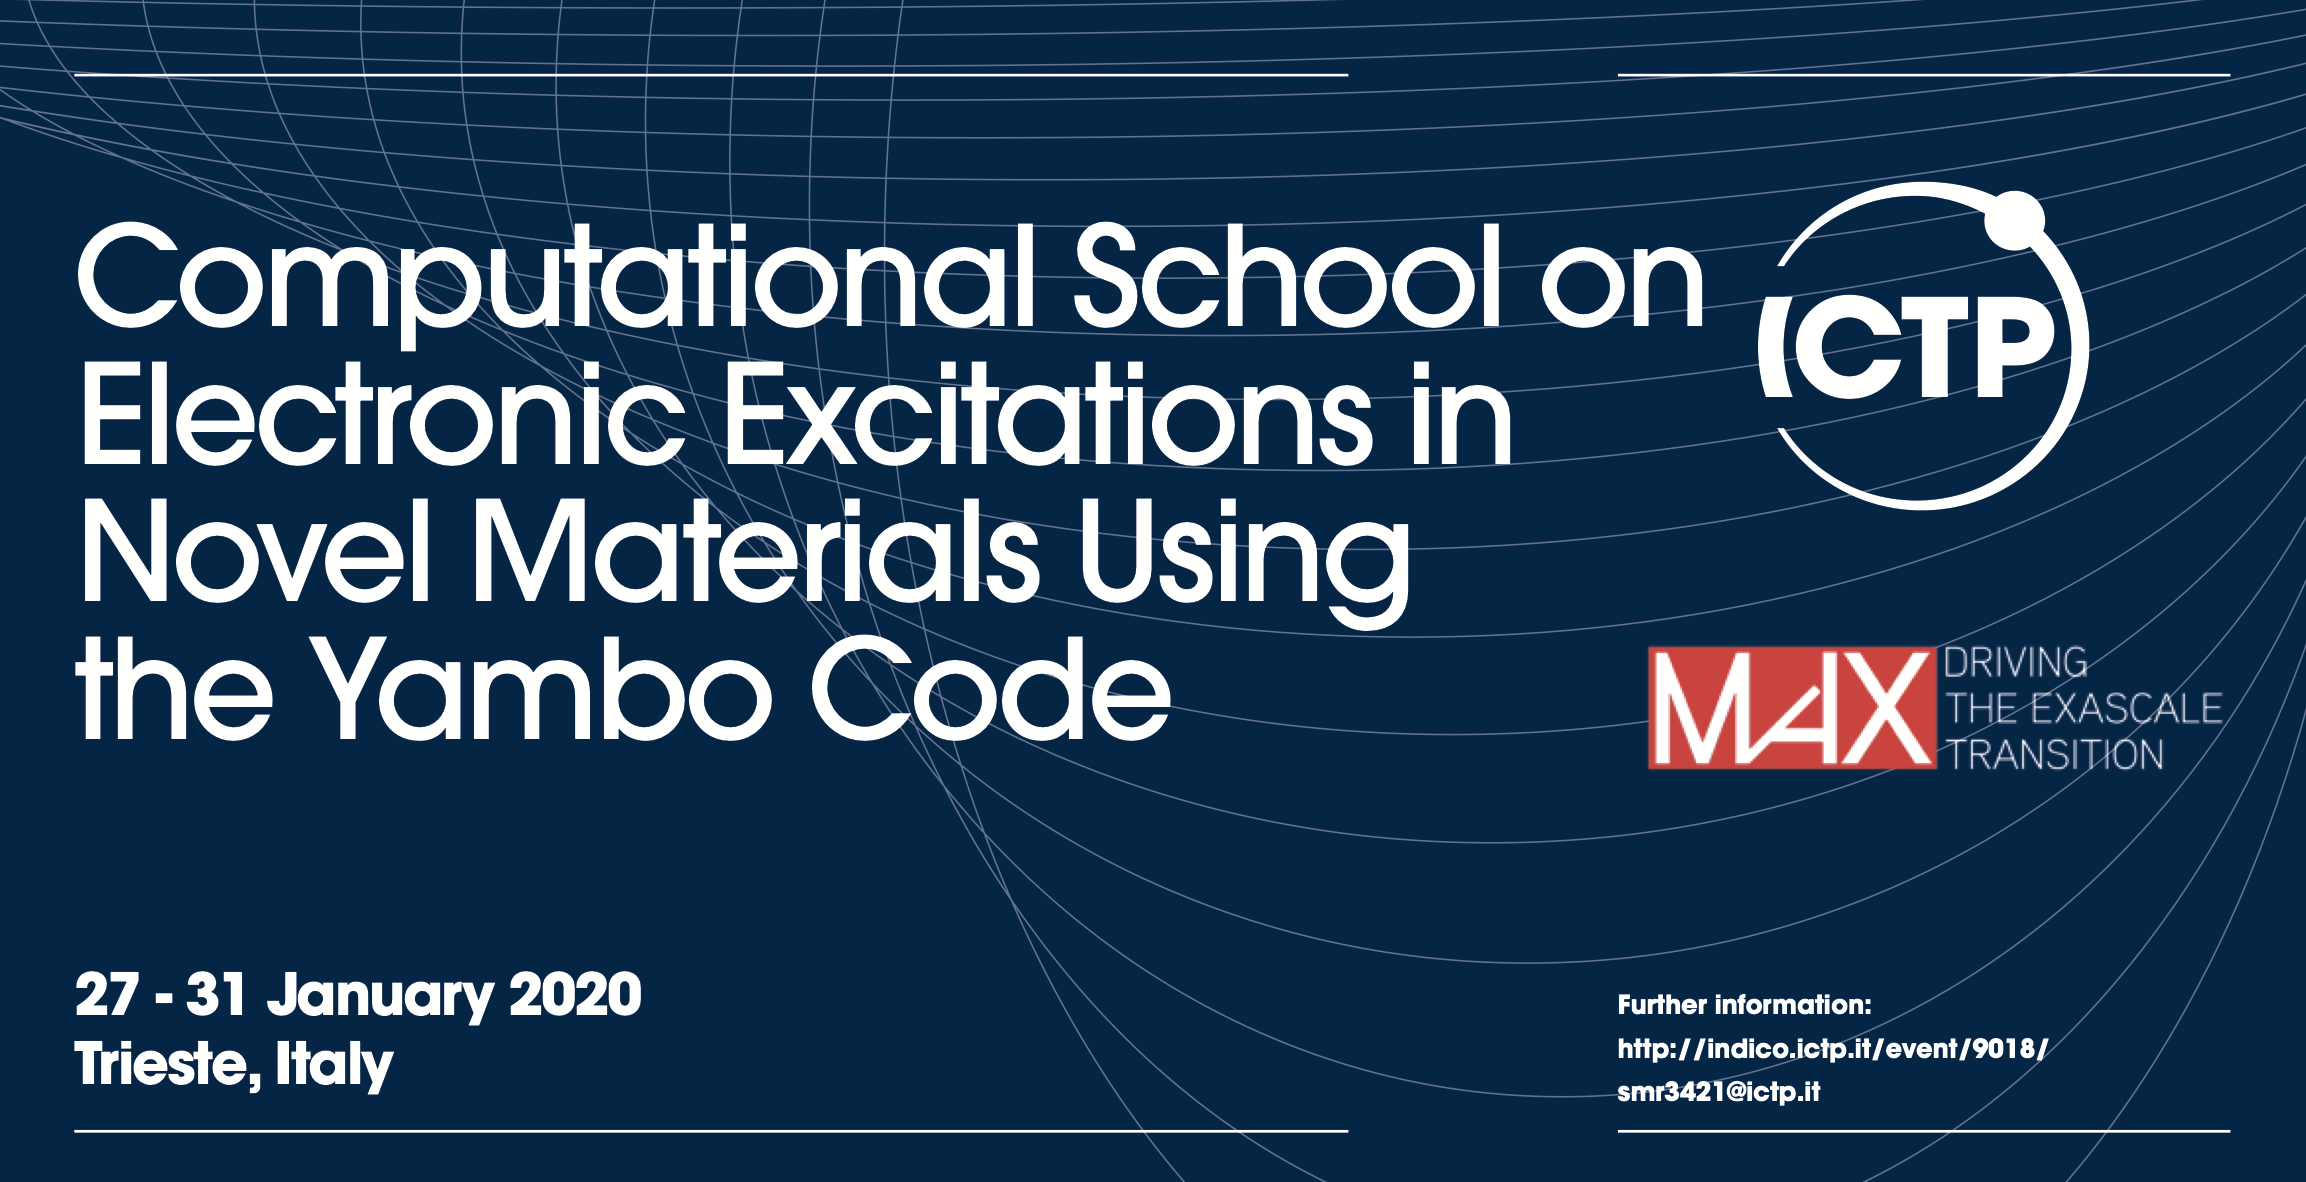 Computational School on Electronic Excitations in Novel Materials Using the Yambo Code